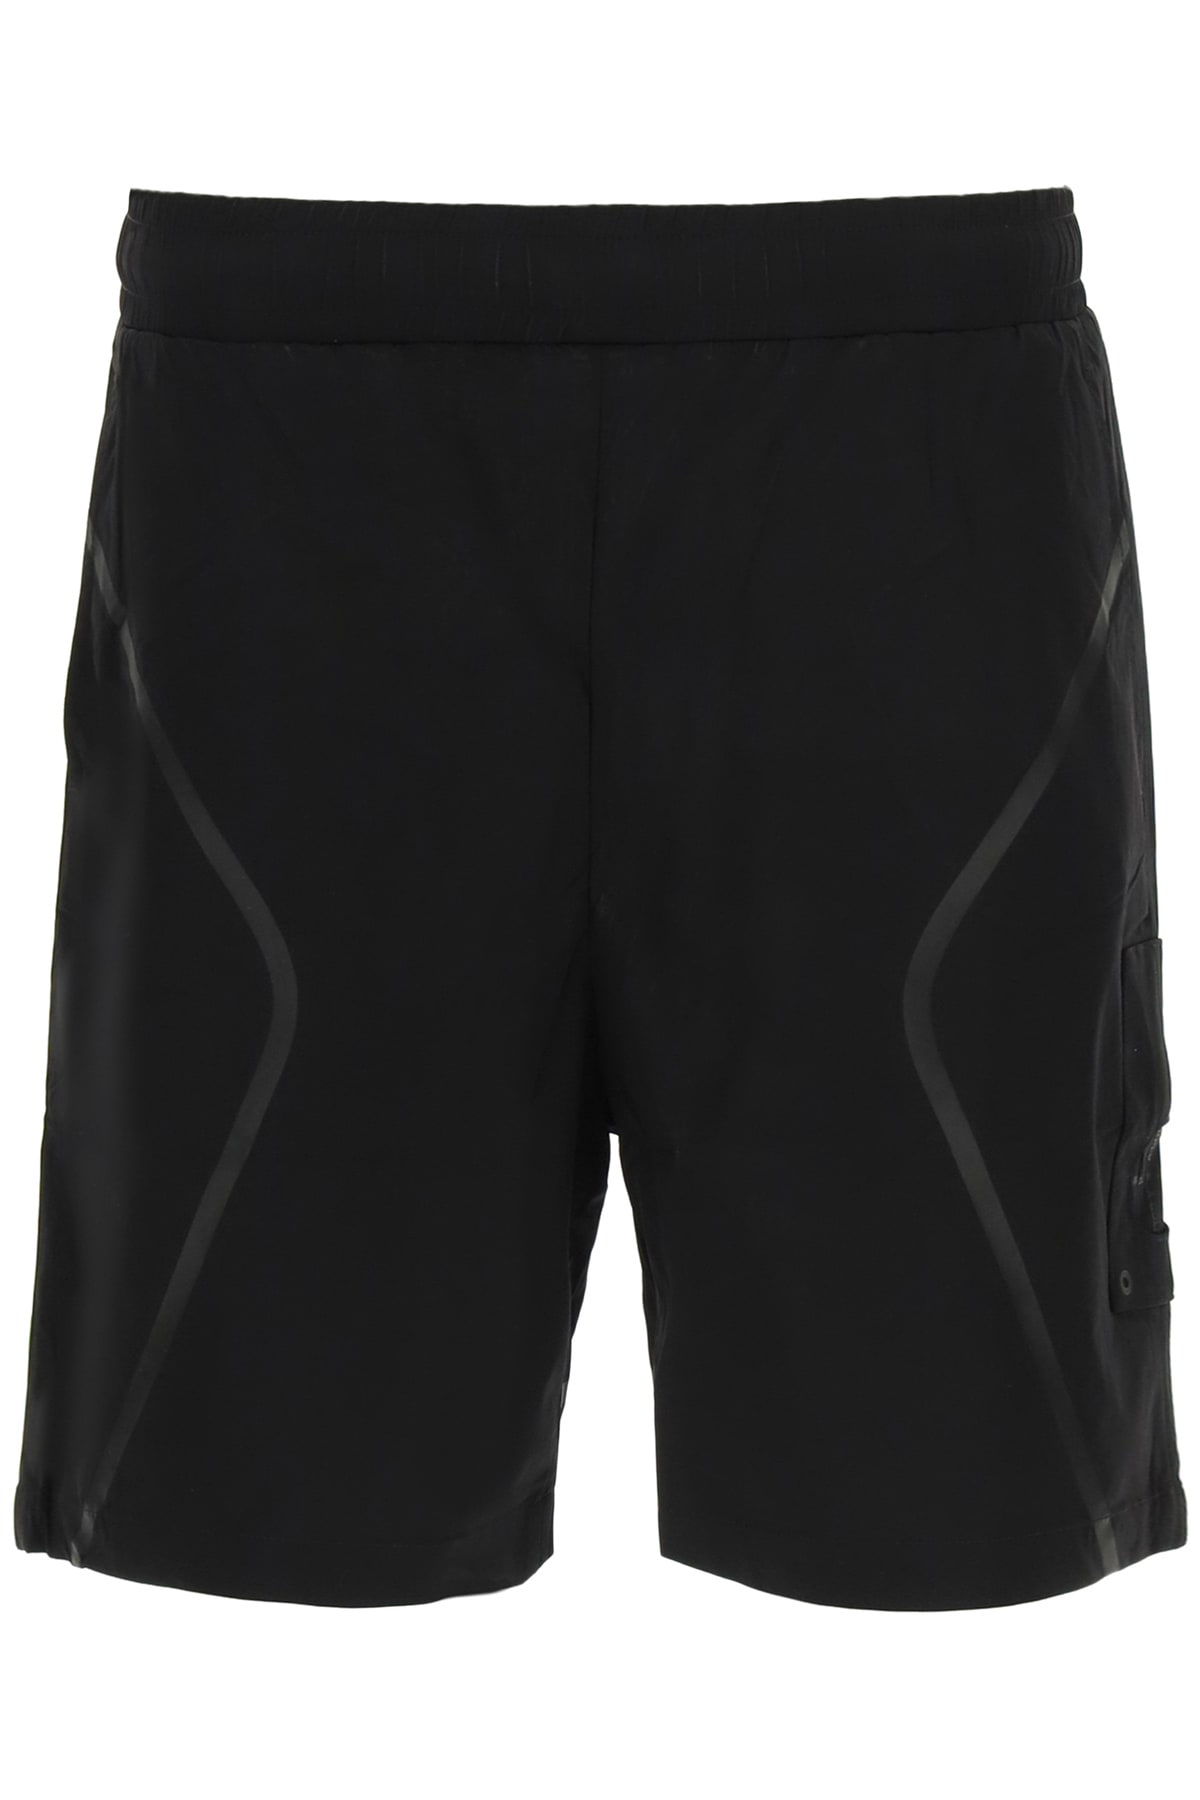 A-COLD-WALL Shorts With Heat-sealed Bands